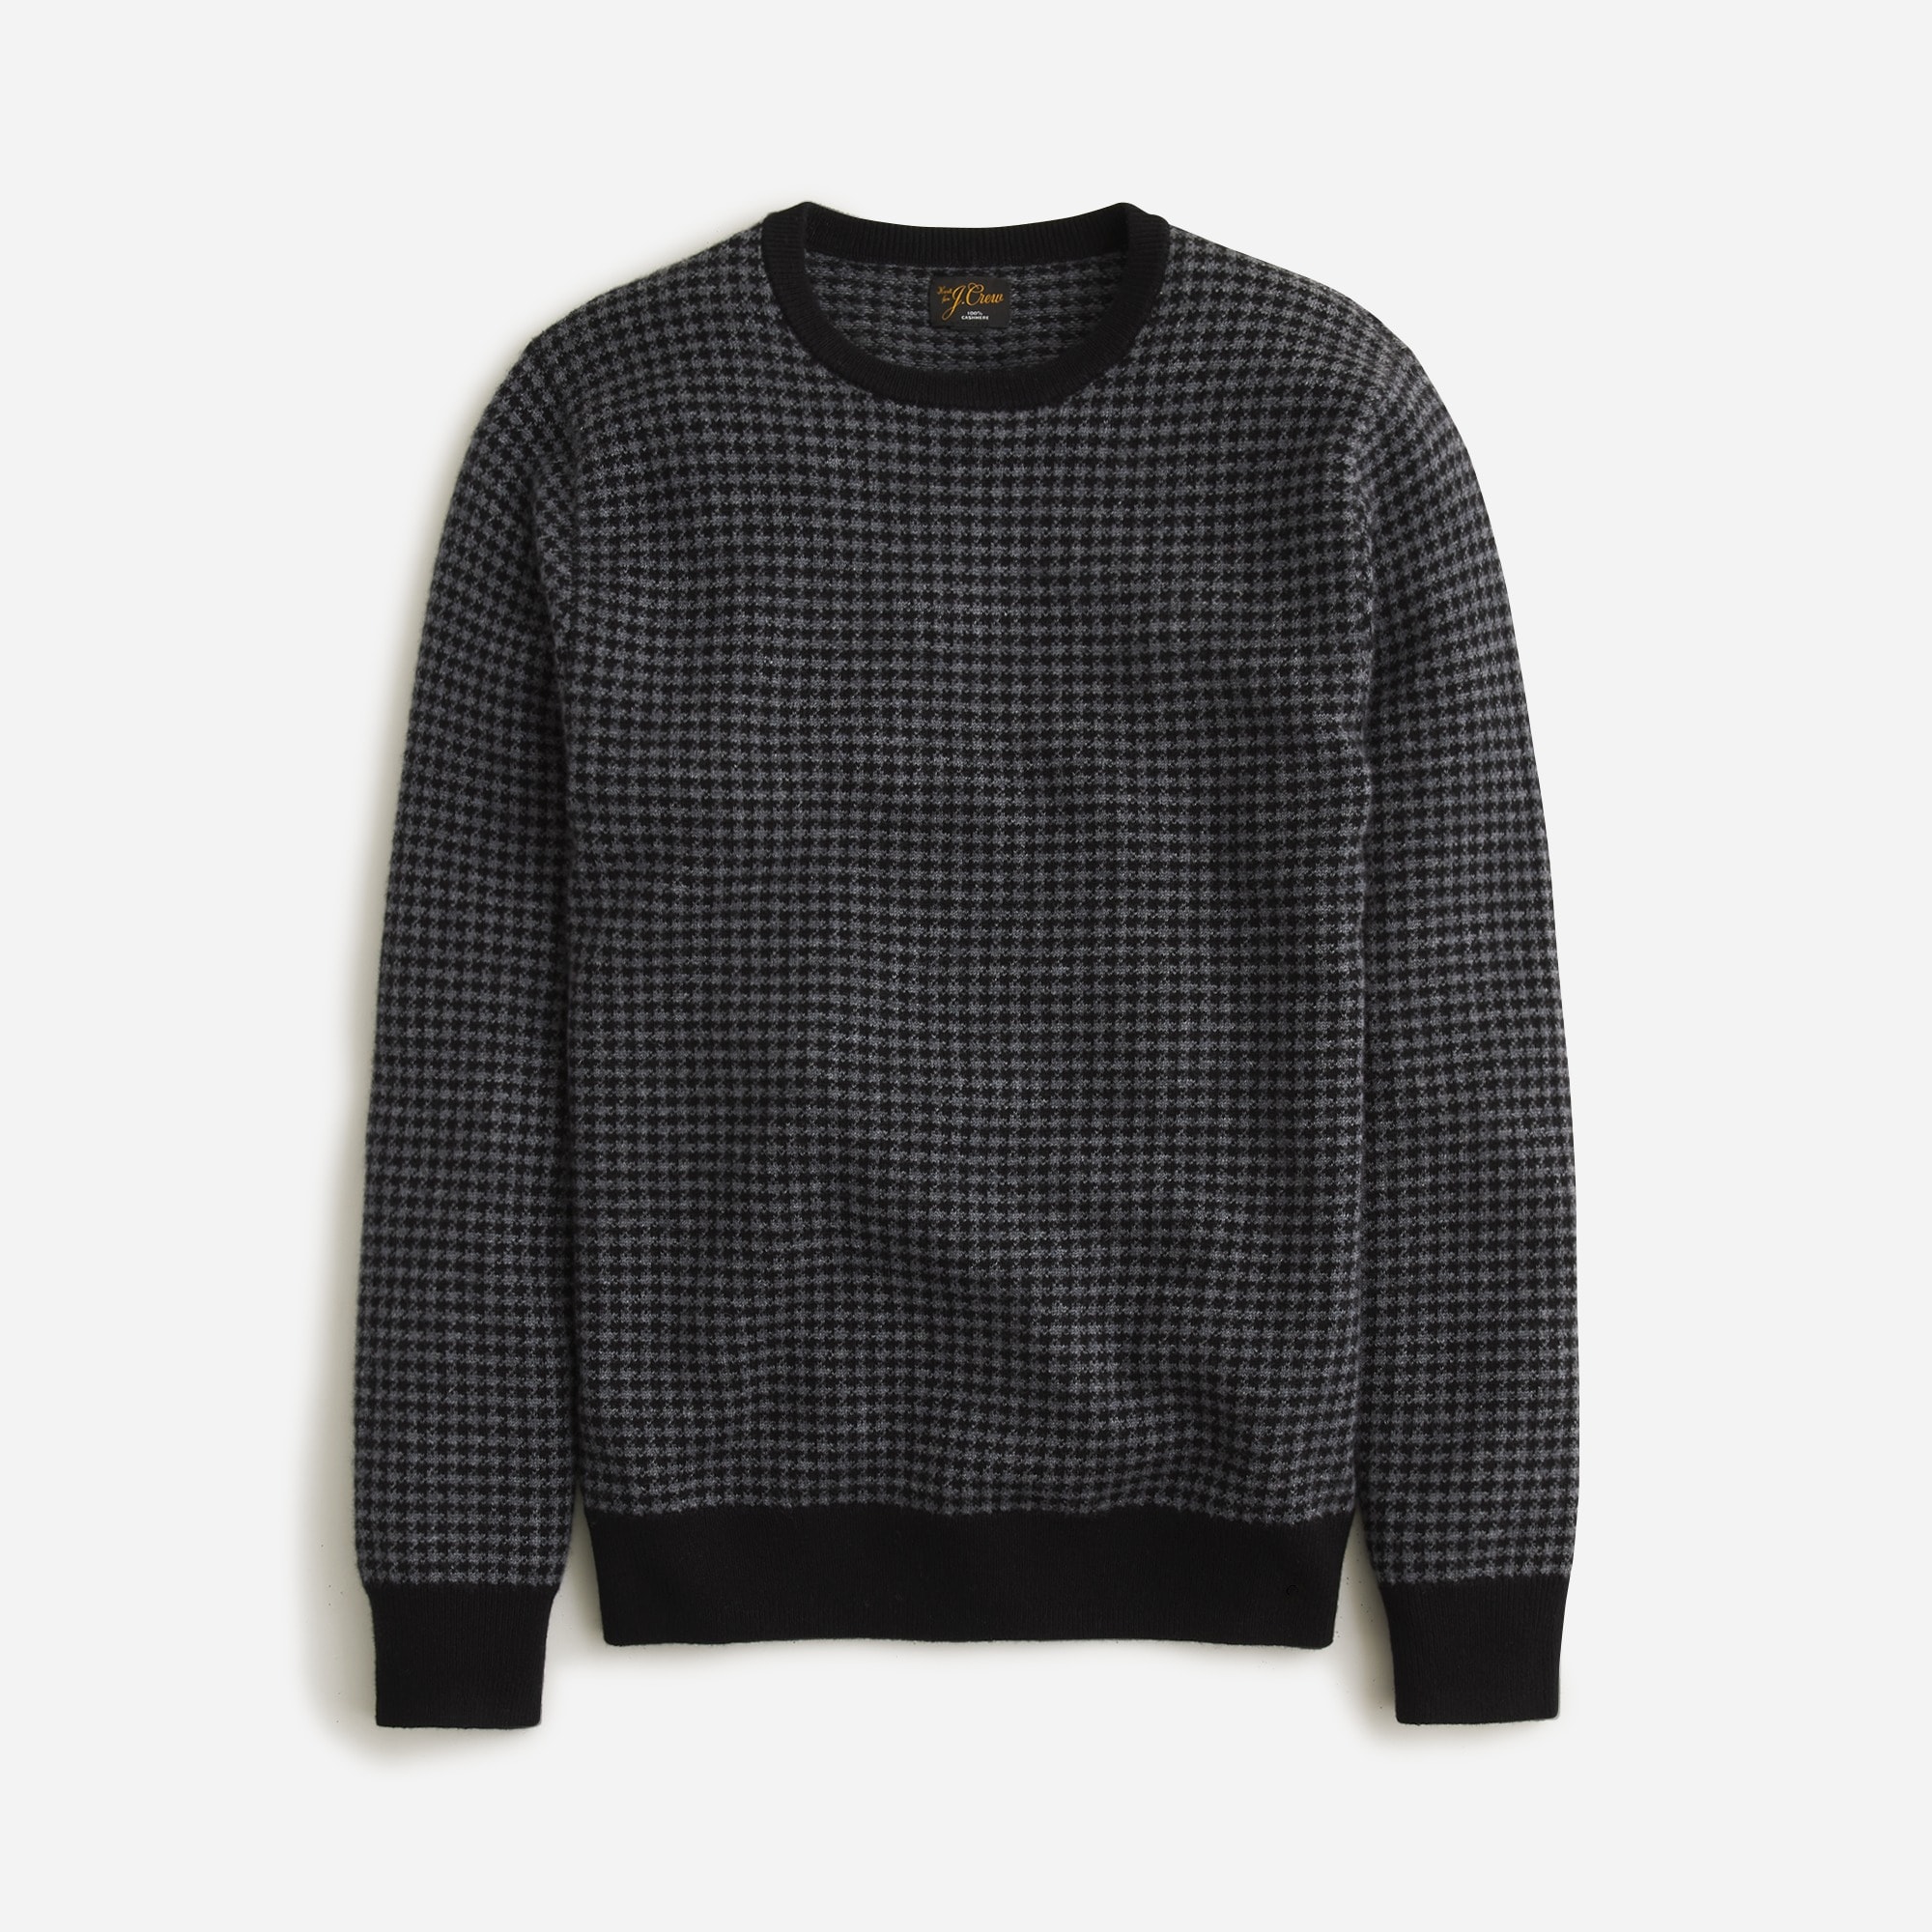 J.Crew: Cashmere Crewneck Sweater In Houndstooth For Men